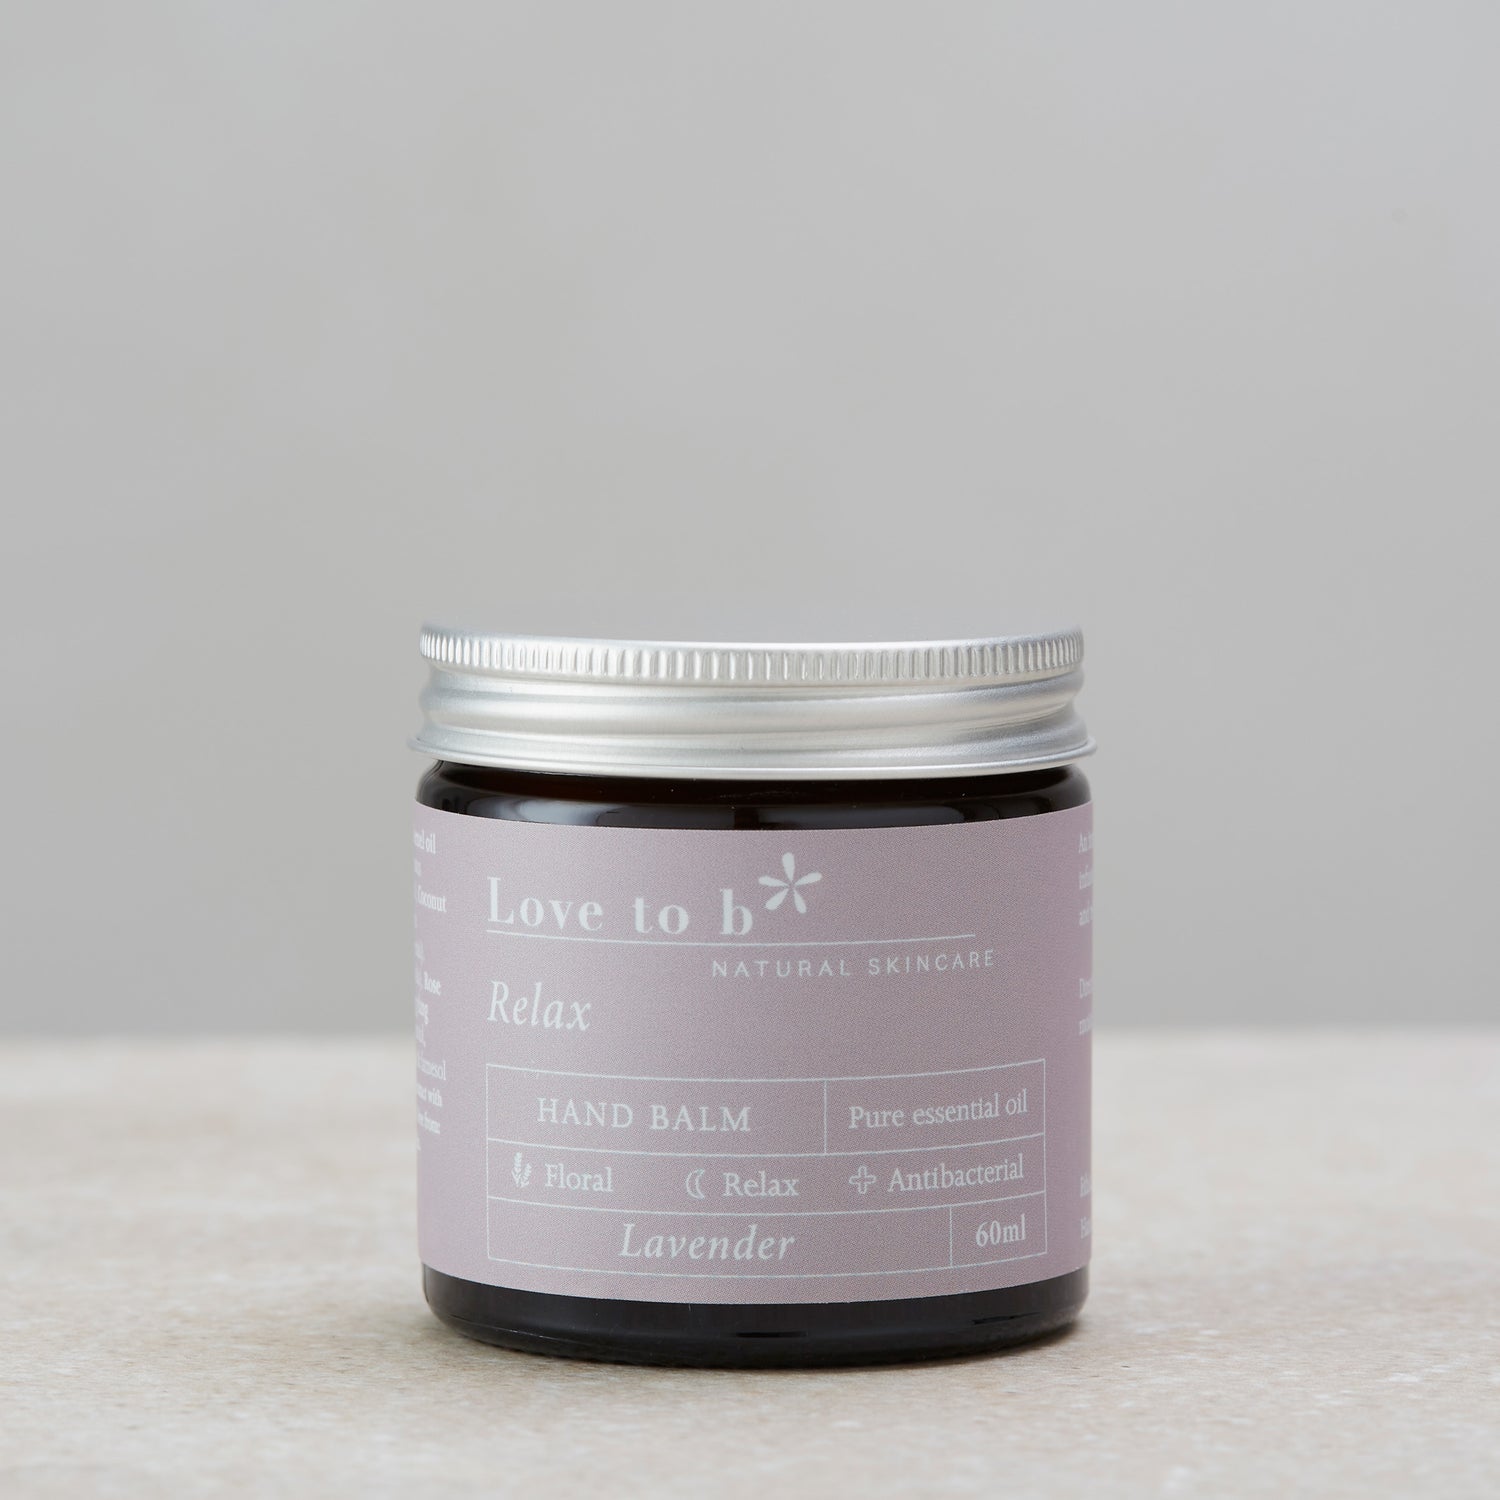 Love to b Natural Skincare Relaxing Lavender Hand Balm 